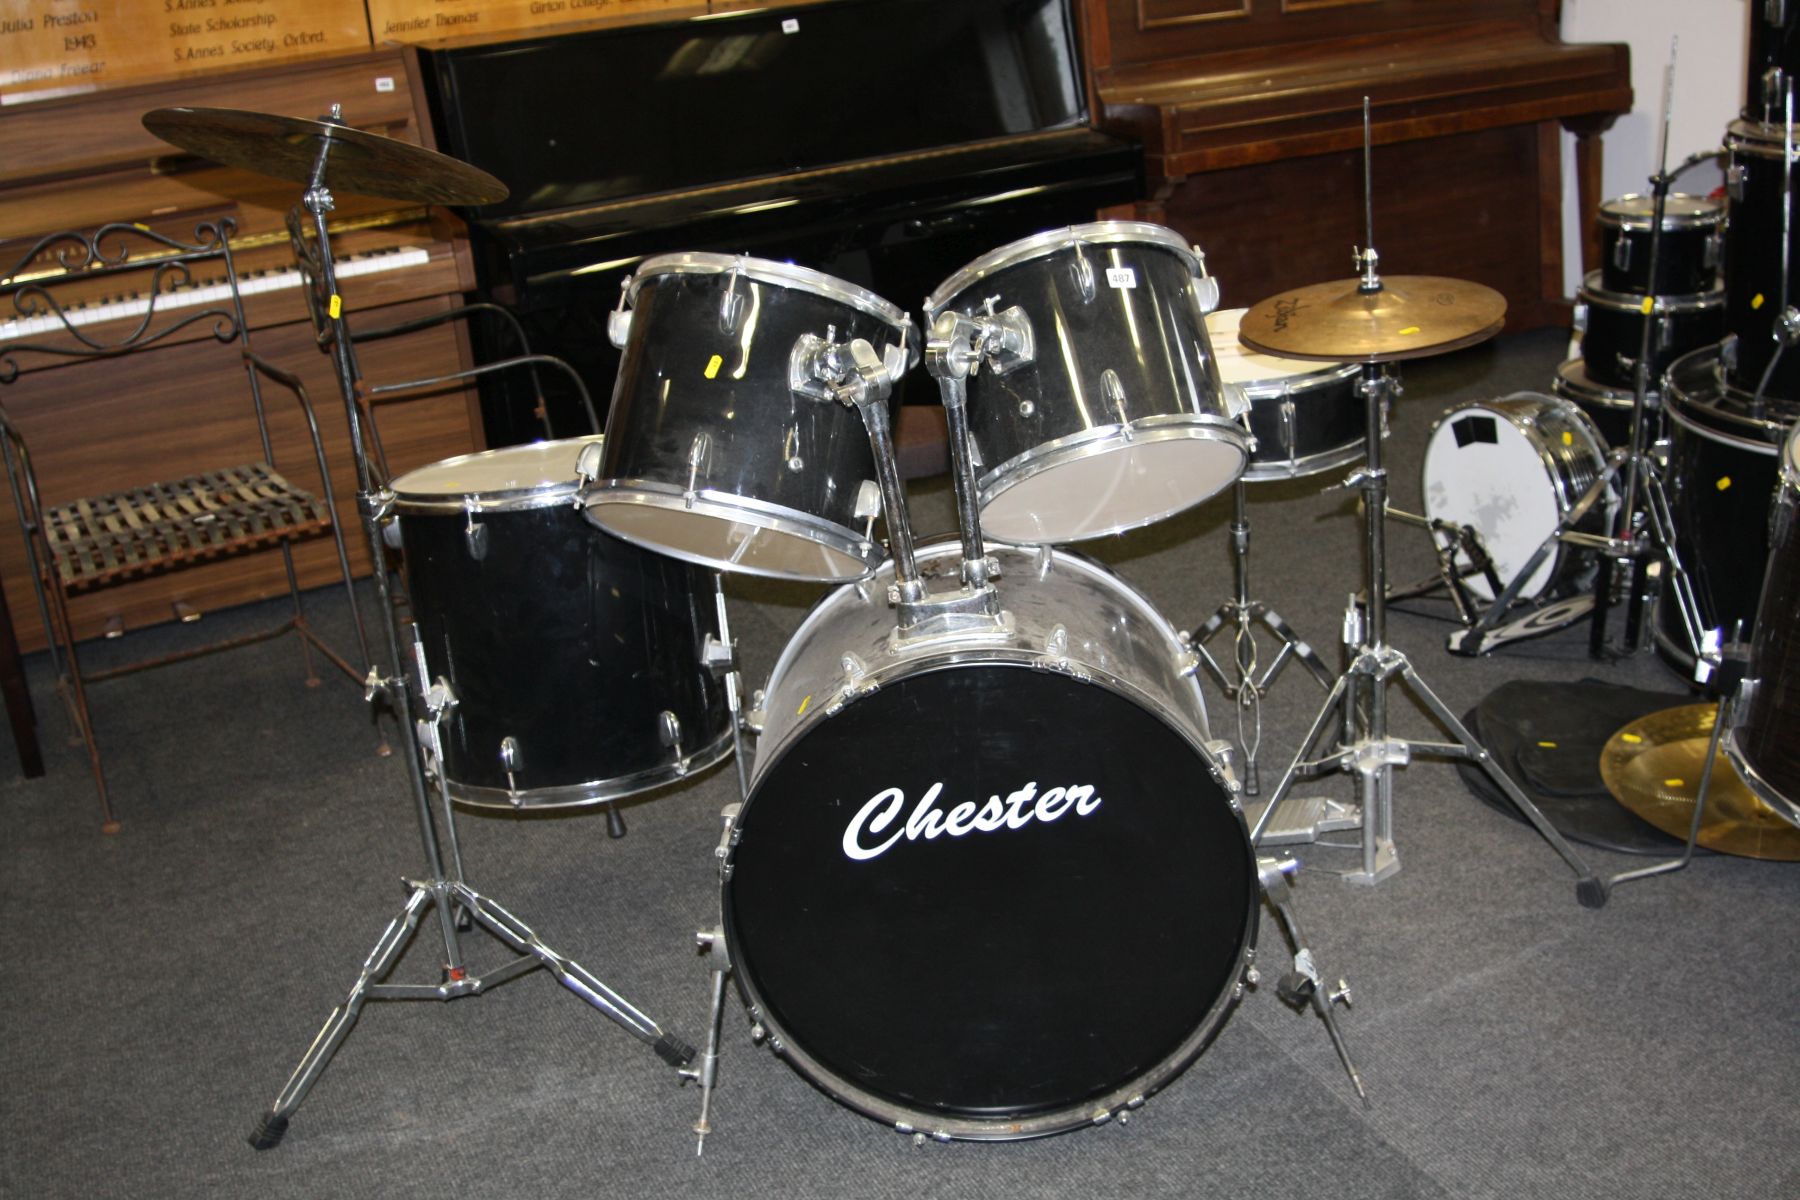 A CHESTER FIVE PIECE DRUM KIT, in black including 22''x15'' kick drum with pedal, a12''x9'' Tom, a